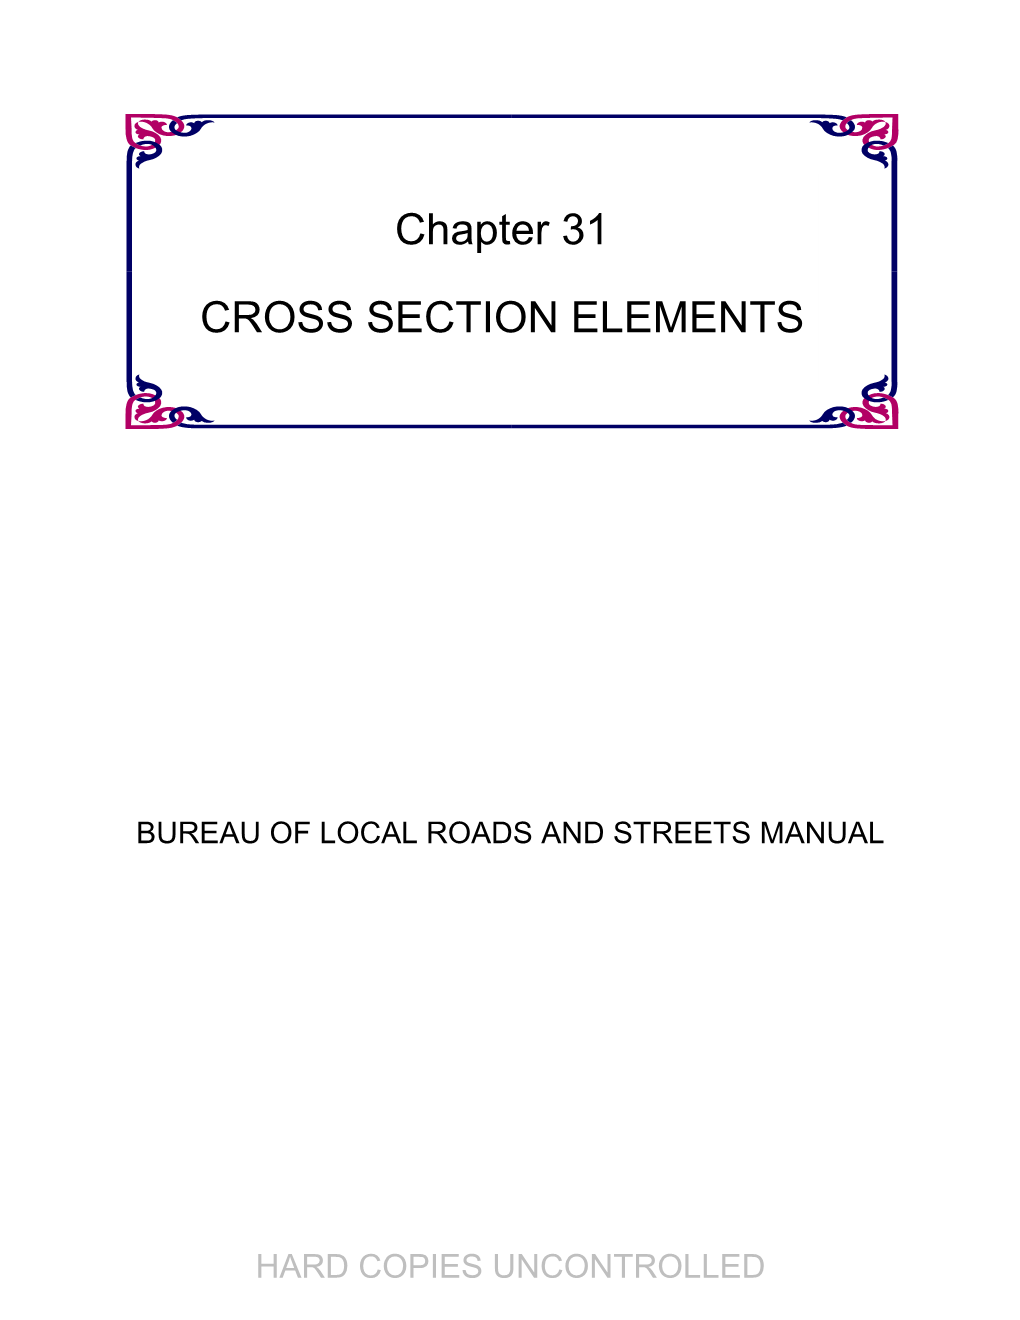 Chapter 31 CROSS SECTION ELEMENTS